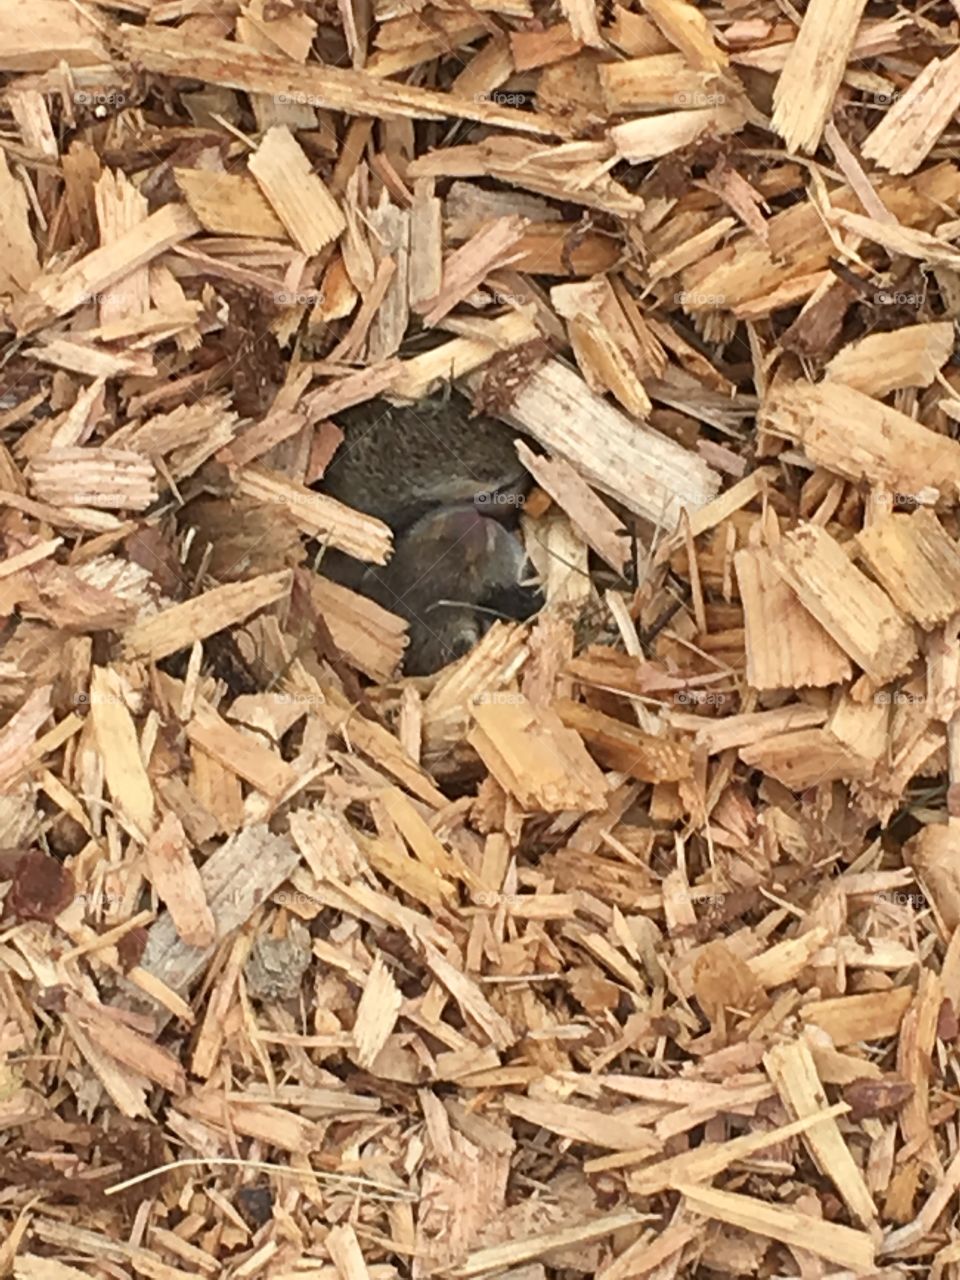 Tiny baby bunnies in the wood chips